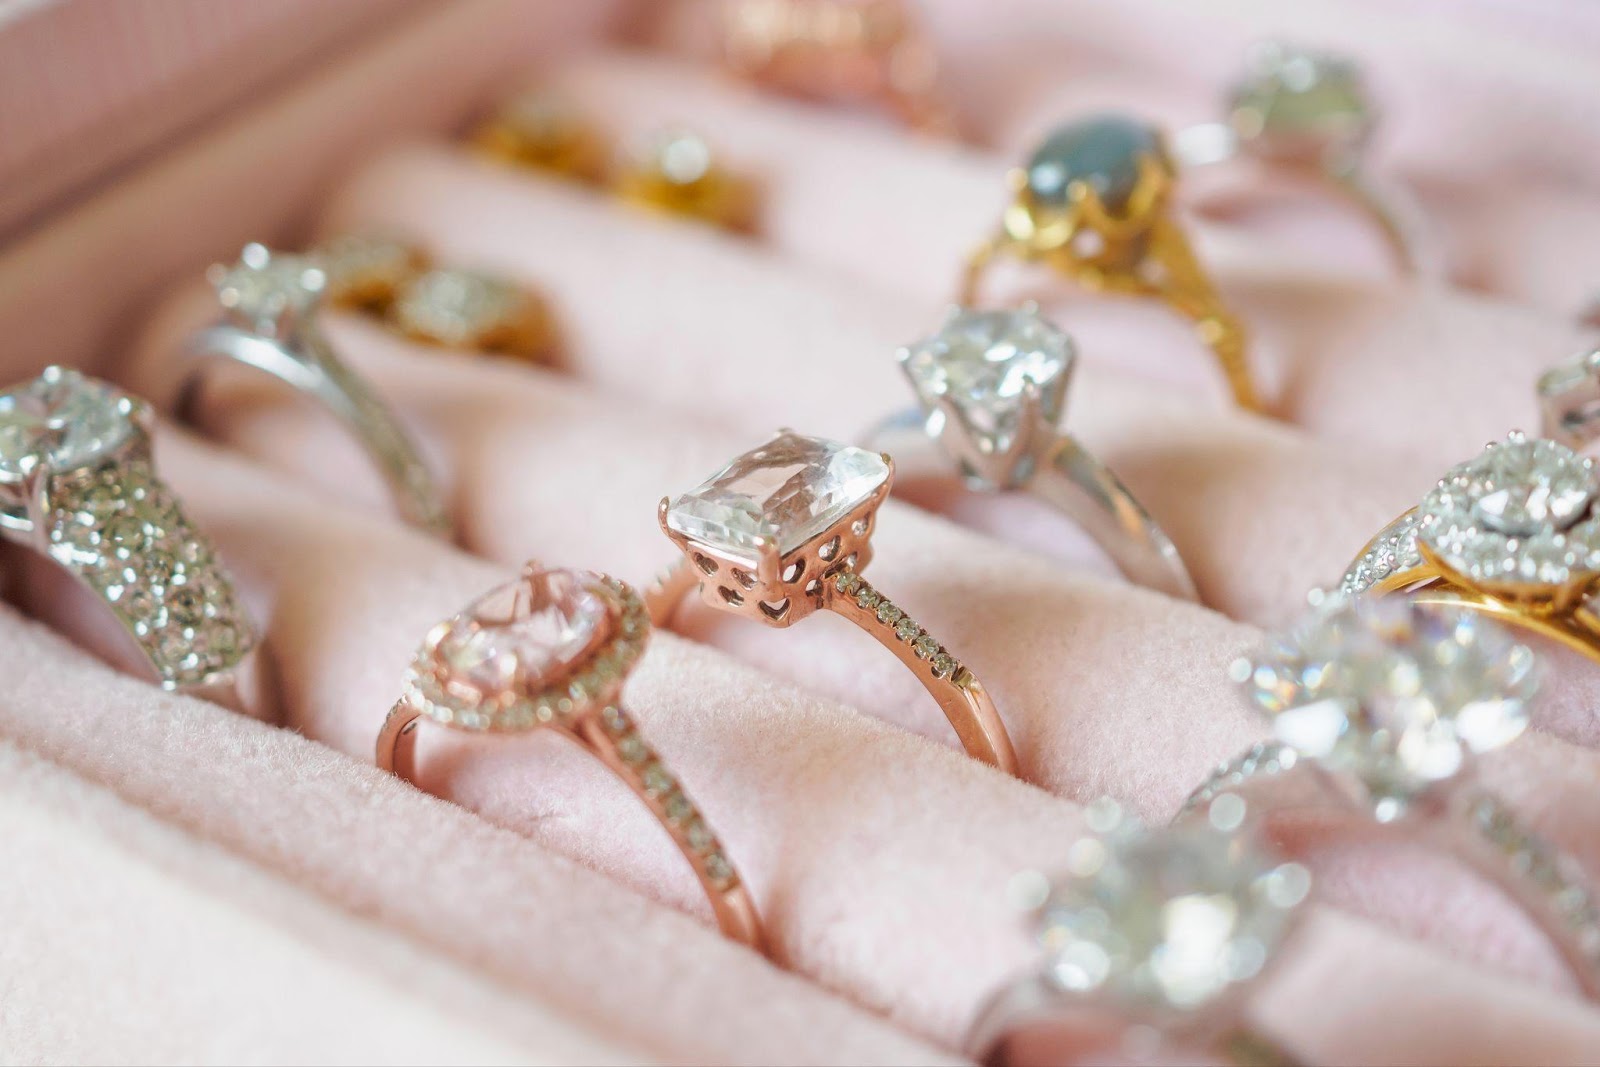 How to Choose the Right Jewelry Store?